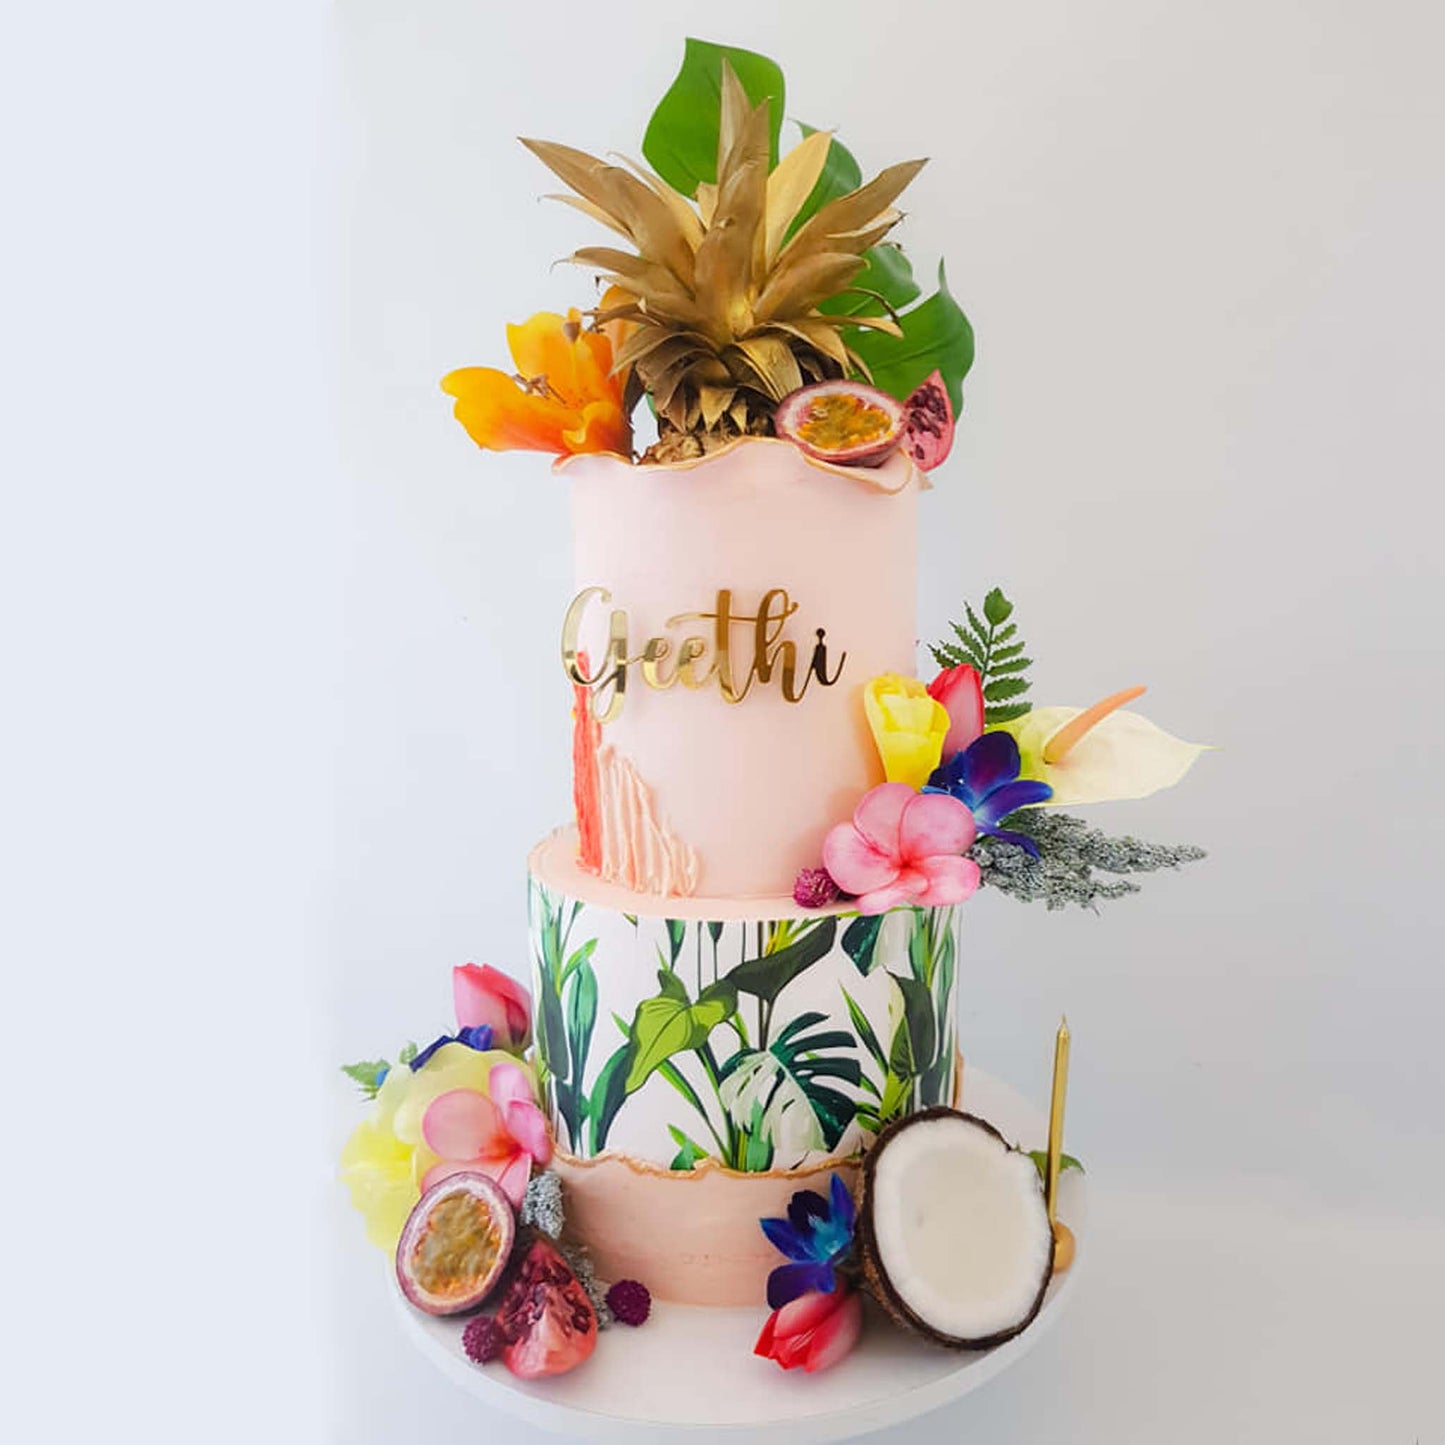 Add these beautiful tropical green leaves icing cake wrap on cakes or sweet treats. Perfect for birthdays, weddings, baby showers or any special event.